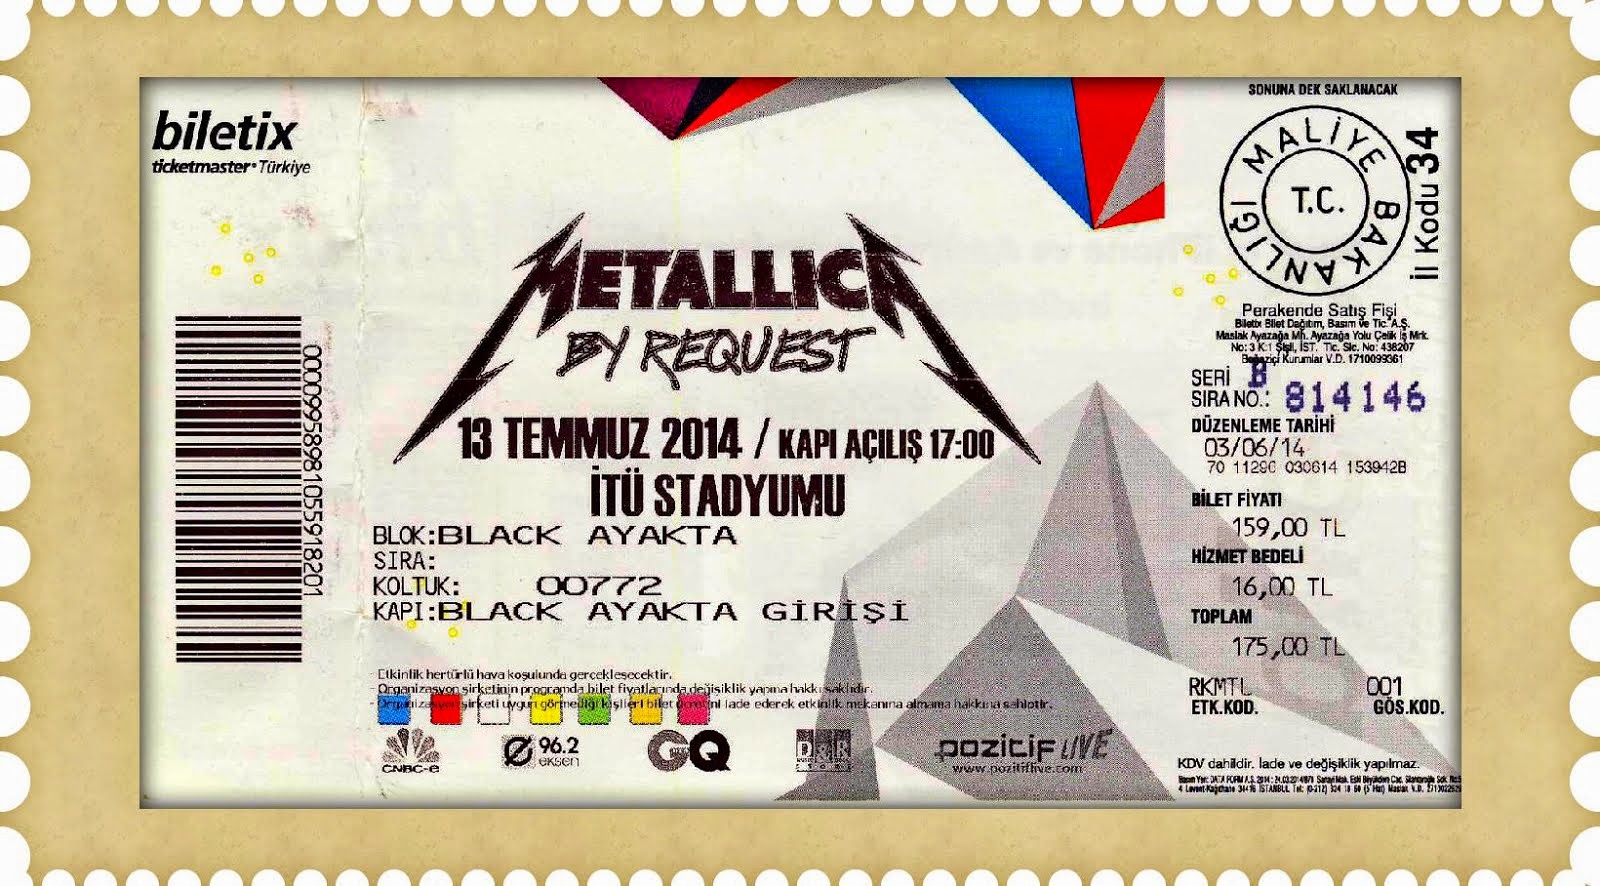 Istanbul : Metallica by Request (13-7-2014)